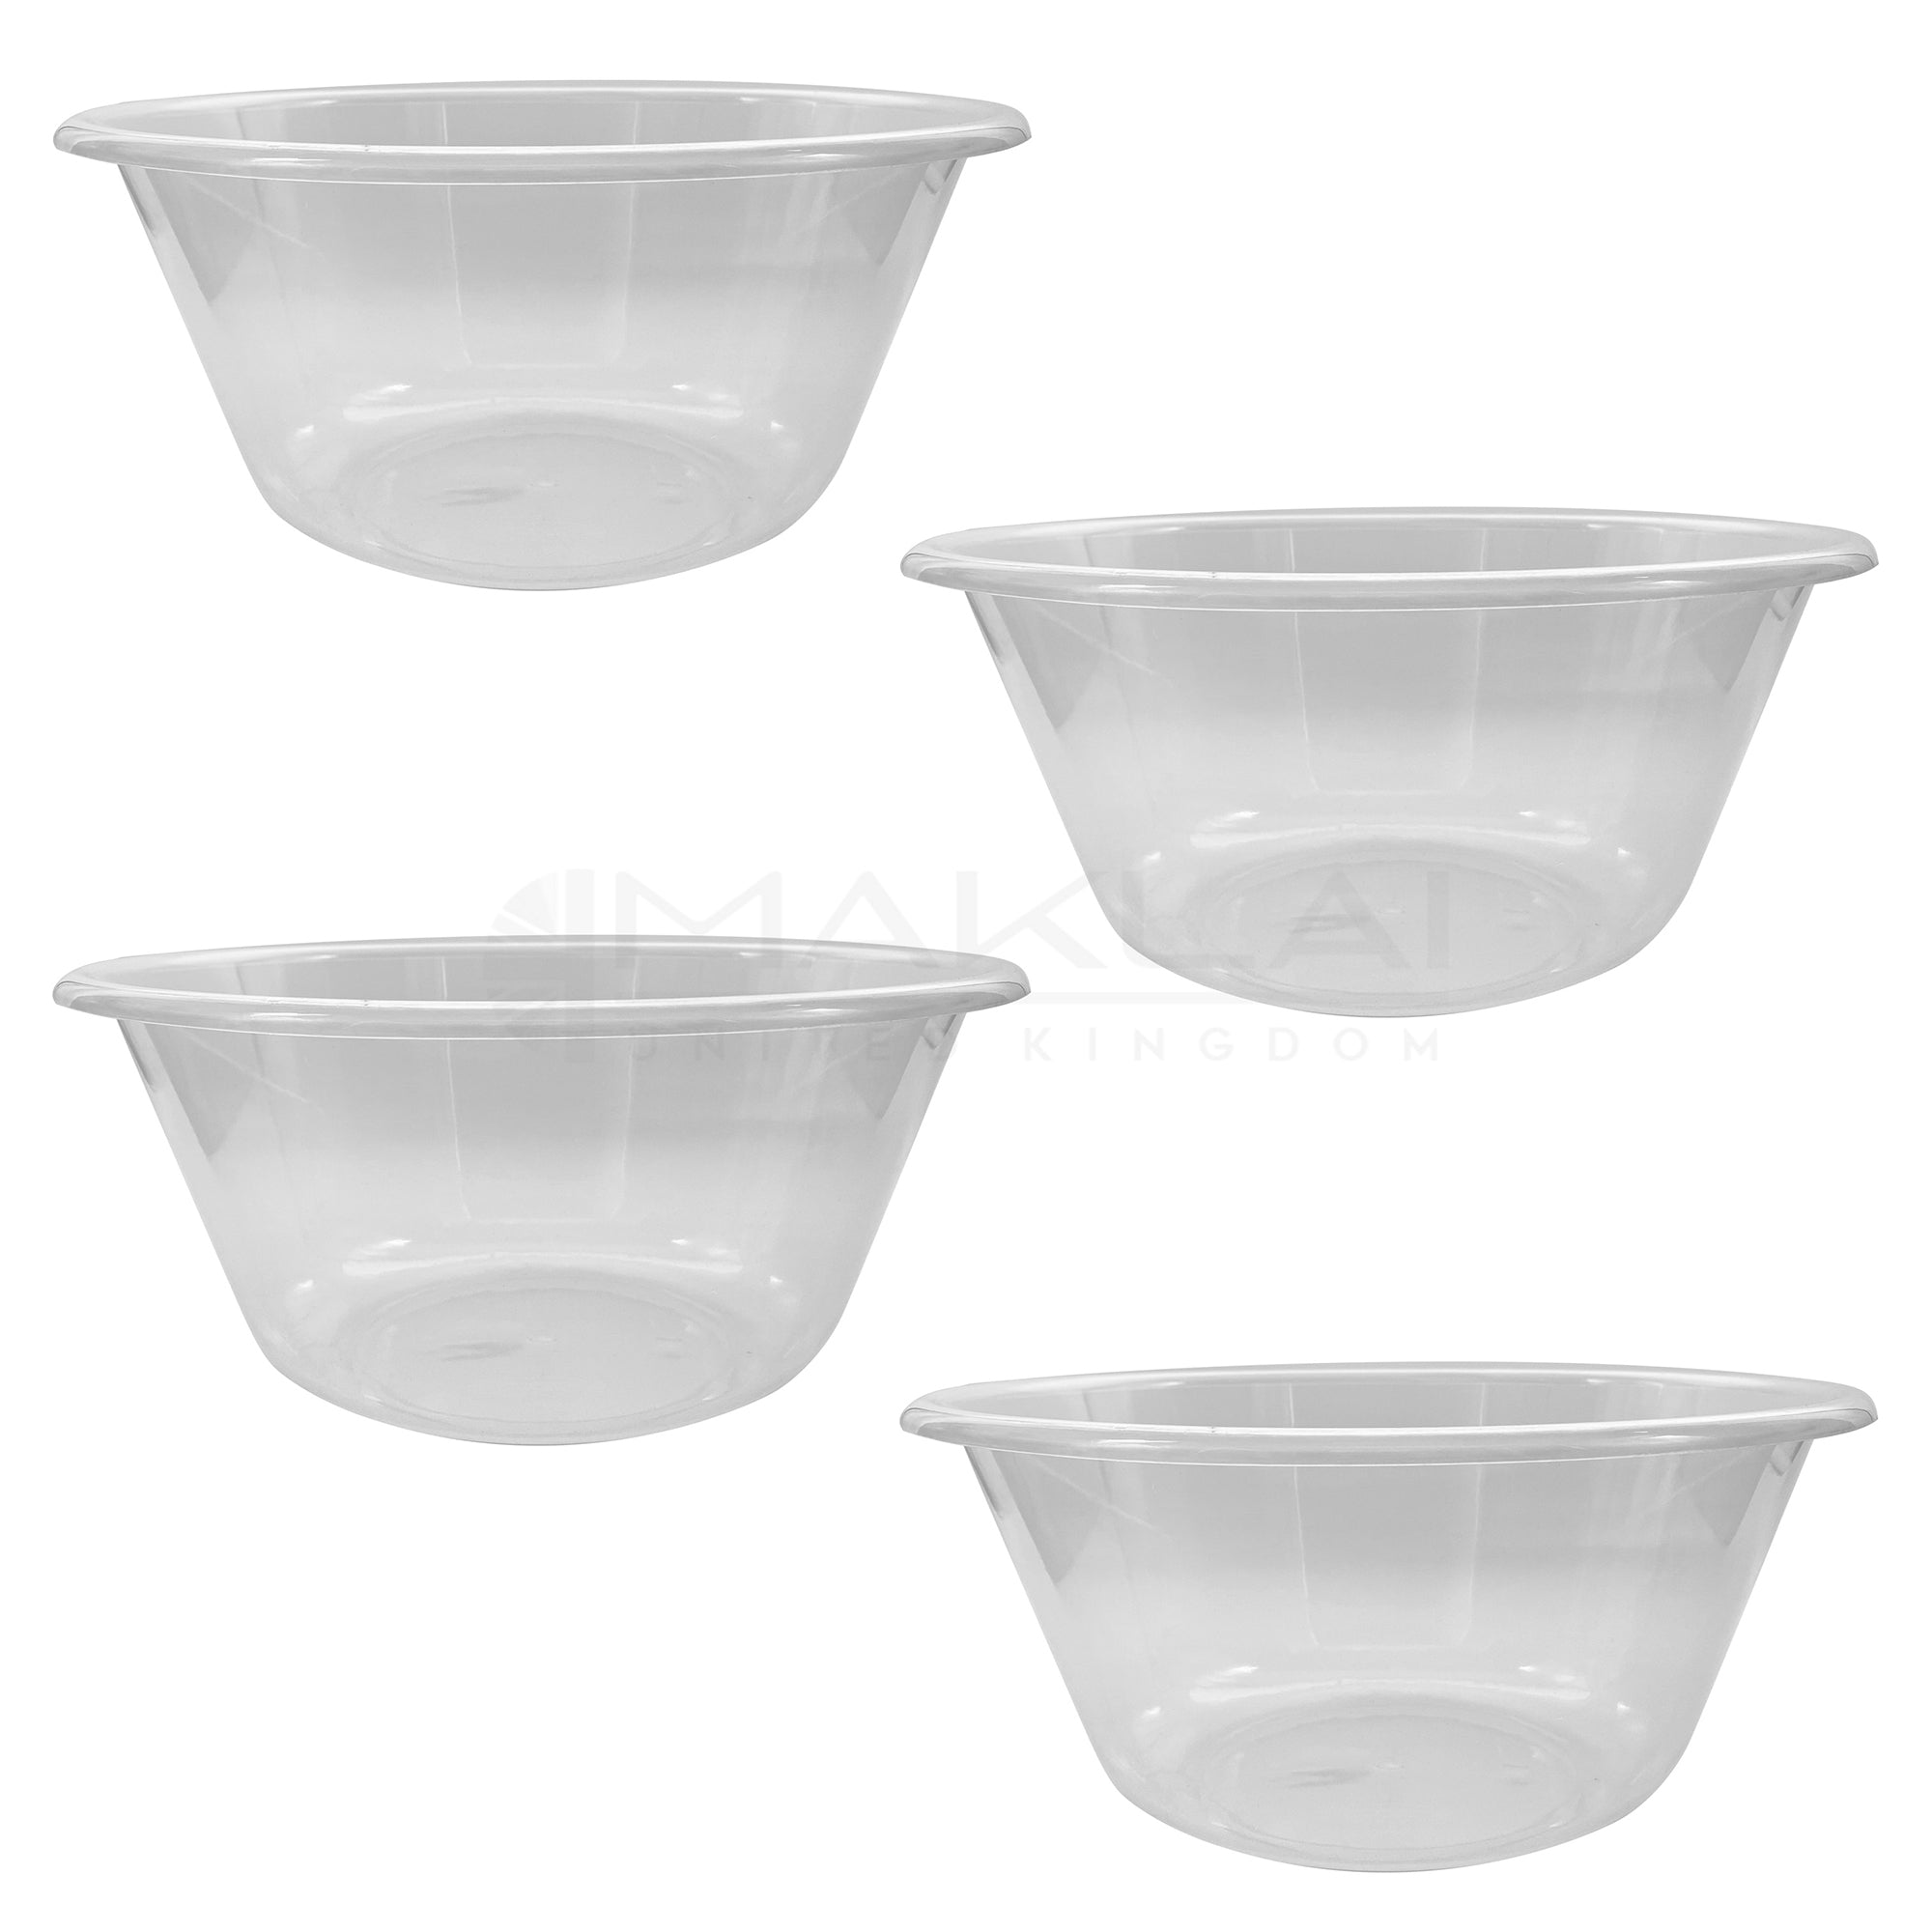 PLASTIC MIXING BOWLS CLEAR Set of 2 SMALL - LARGE 15cm 20cm 25cm